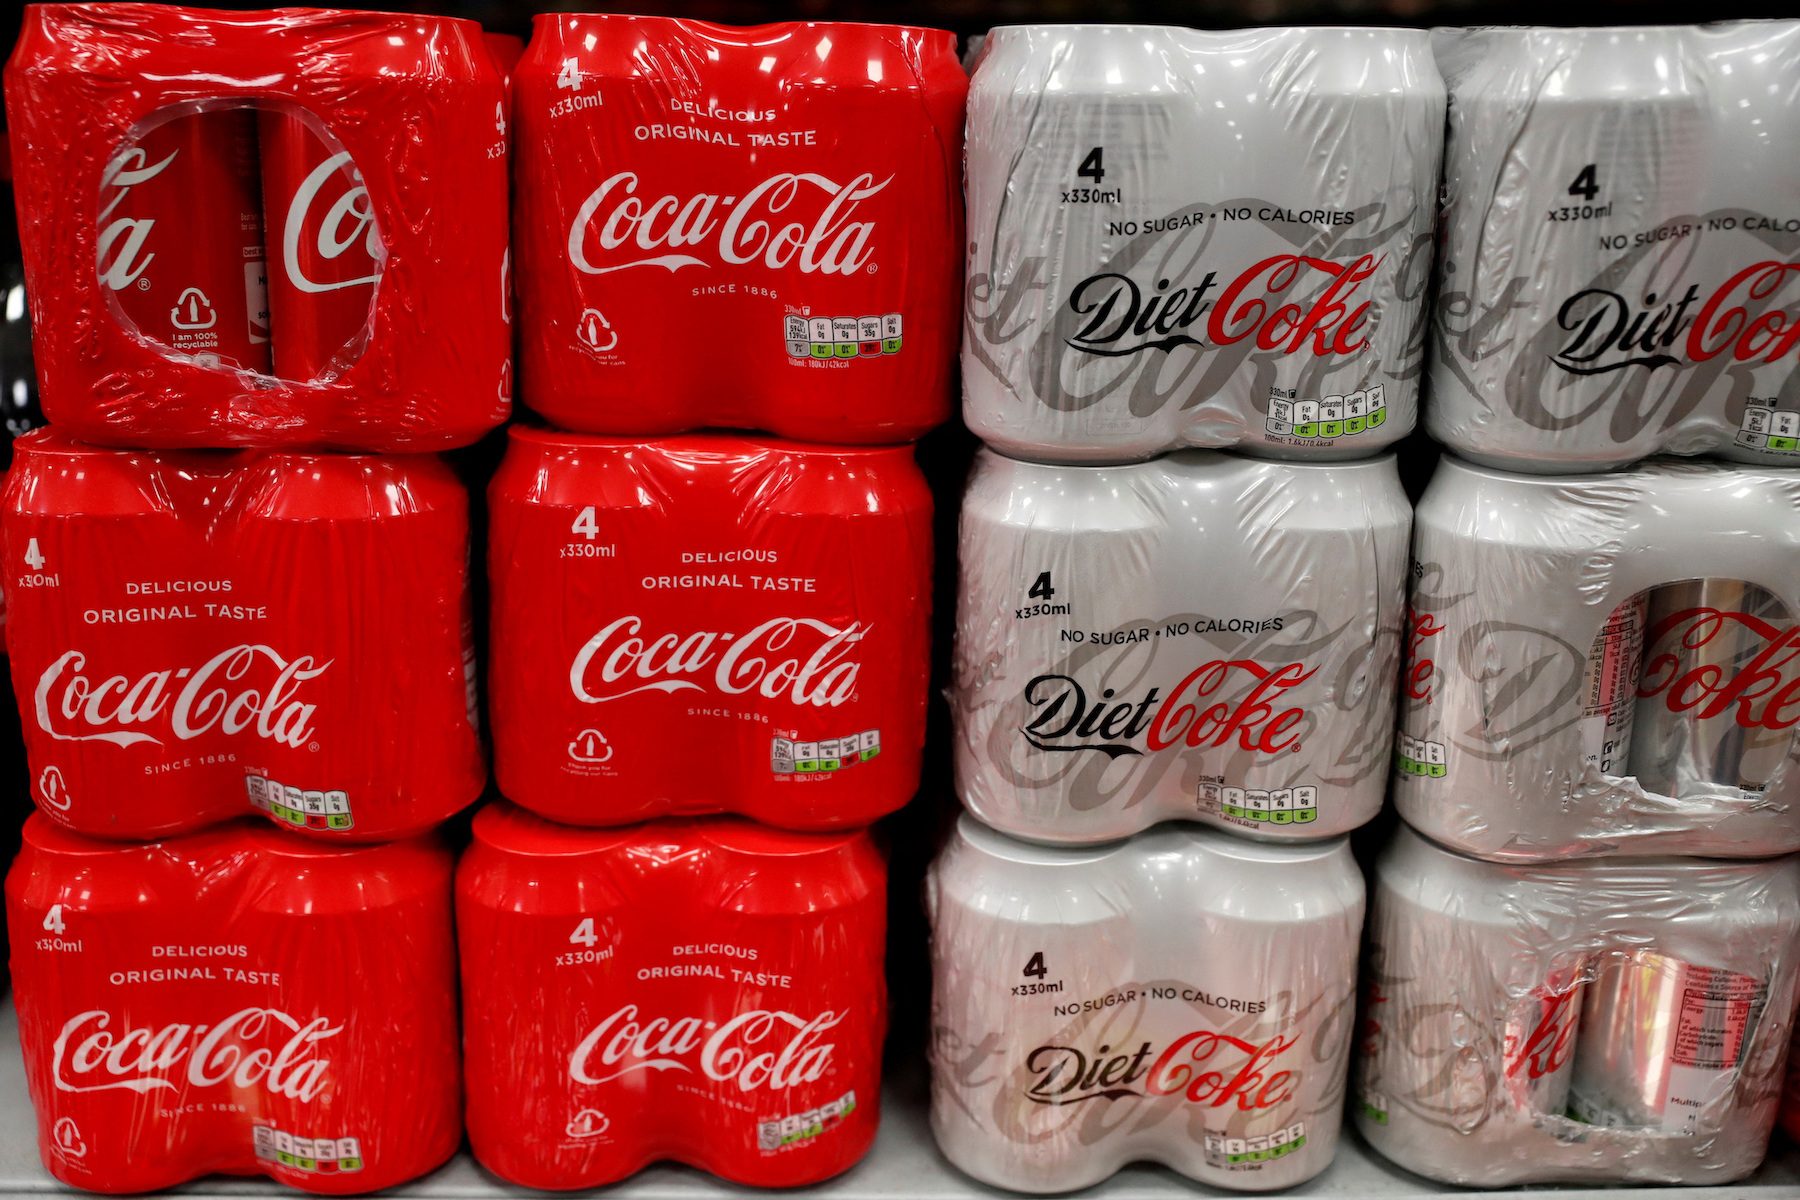 Consumers, food-makers face choice as WHO cancer agency set to warn on aspartame sweeteners